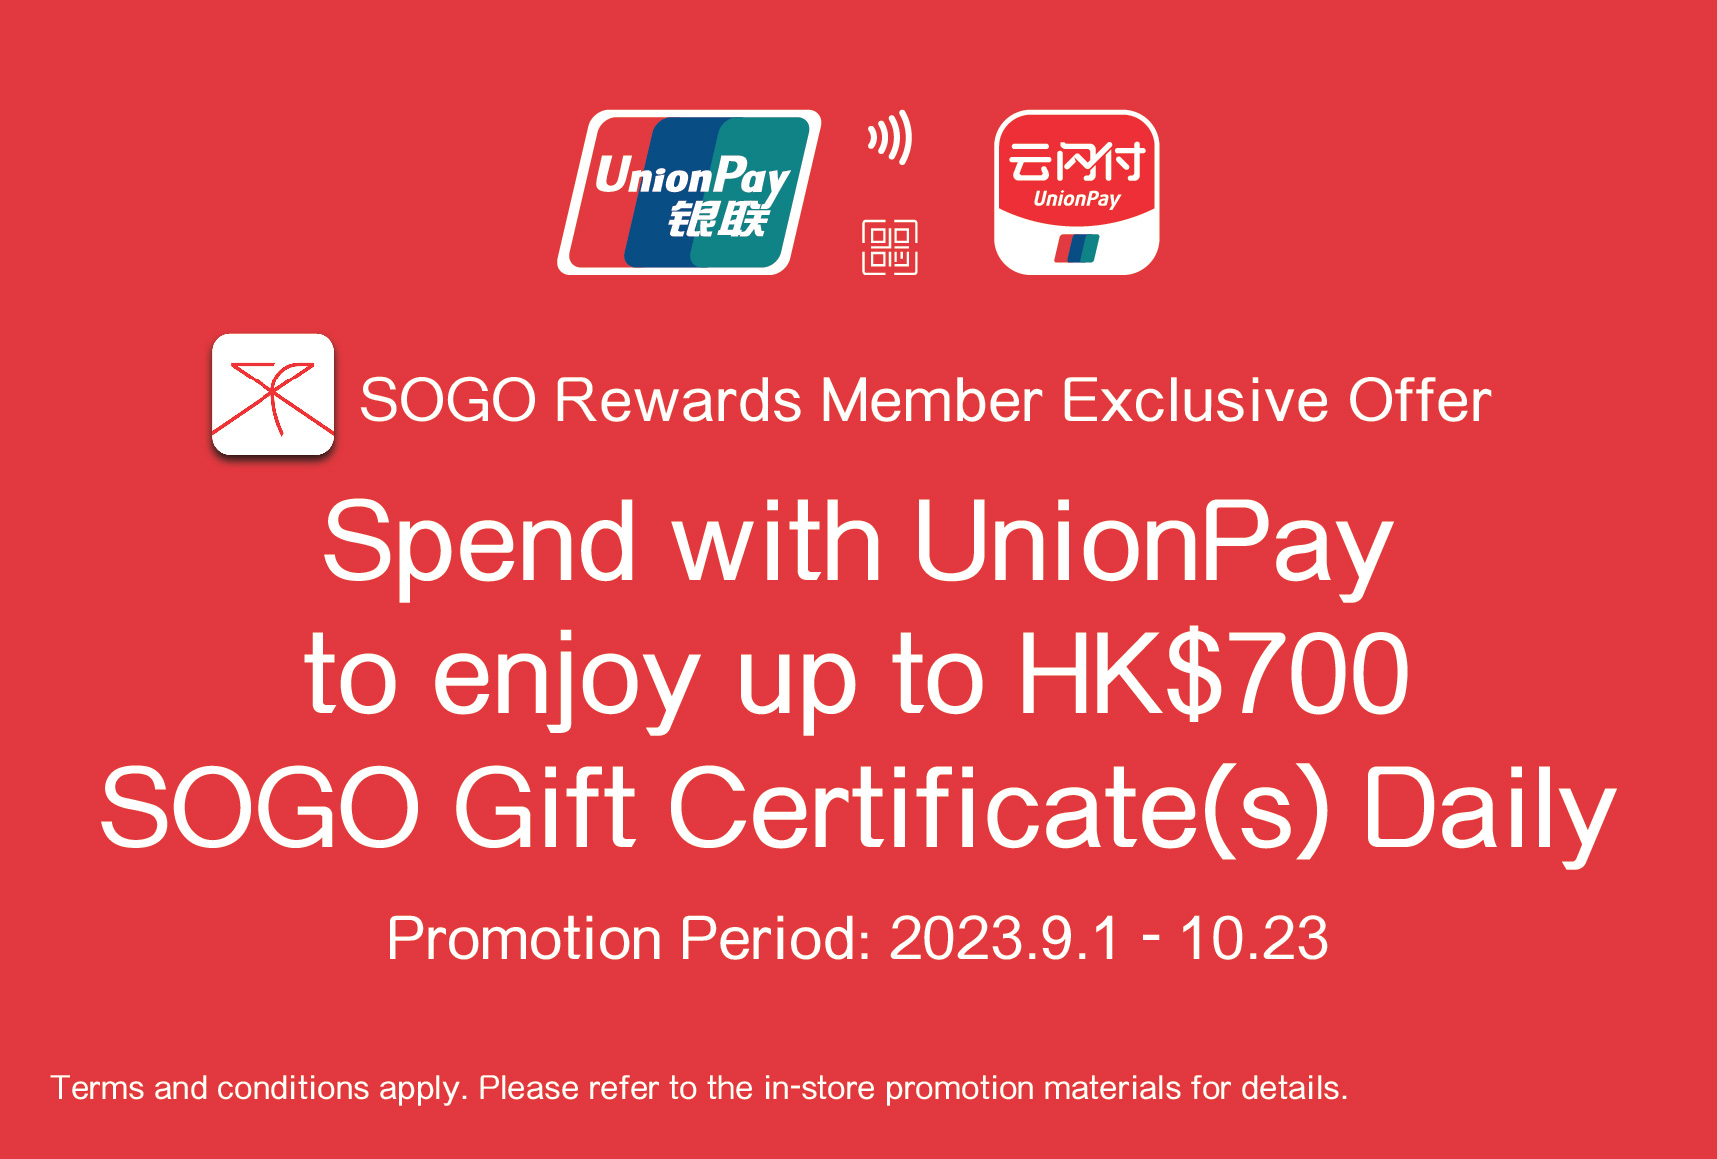 Spend with UnionPay to enjoy up to HK$700 SOGO Gift Certificates Daily